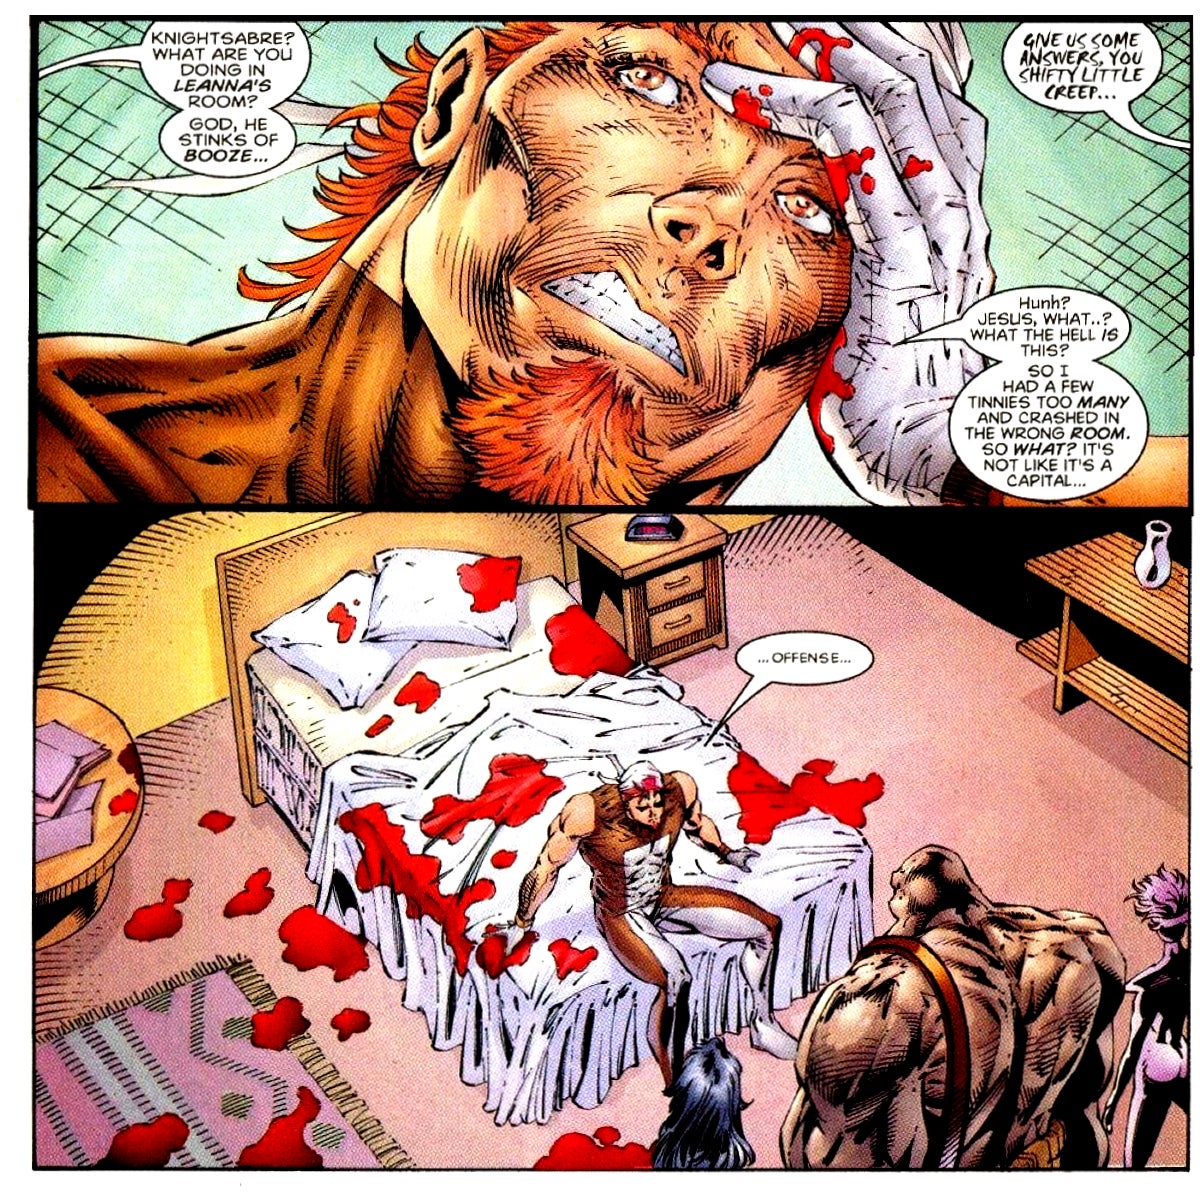 Judgment Day by Alan Moore and Rob Liefeld